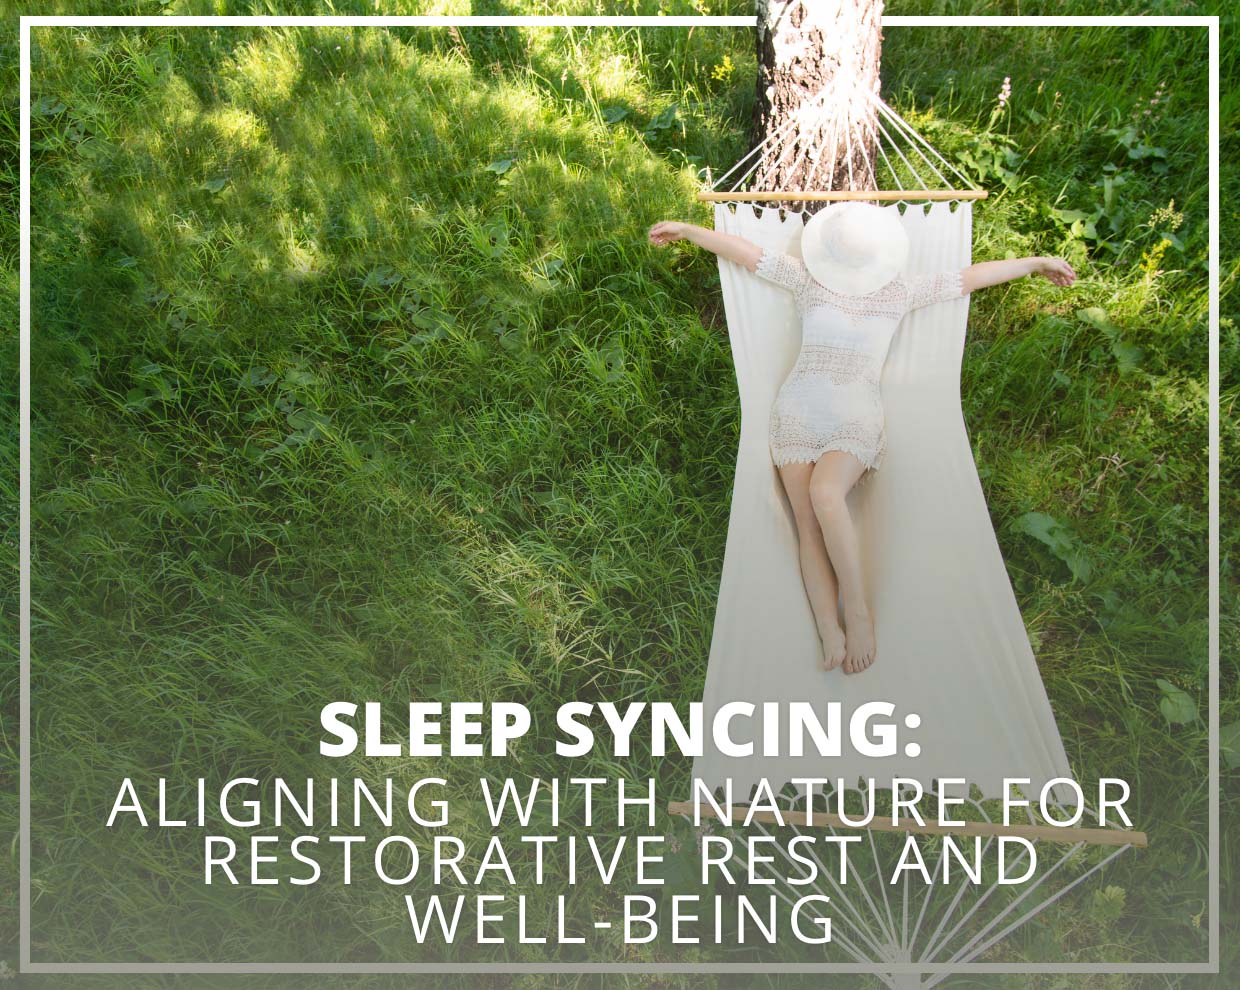 Sleep Syncing: Aligning with Nature for Restorative Rest and Well-being